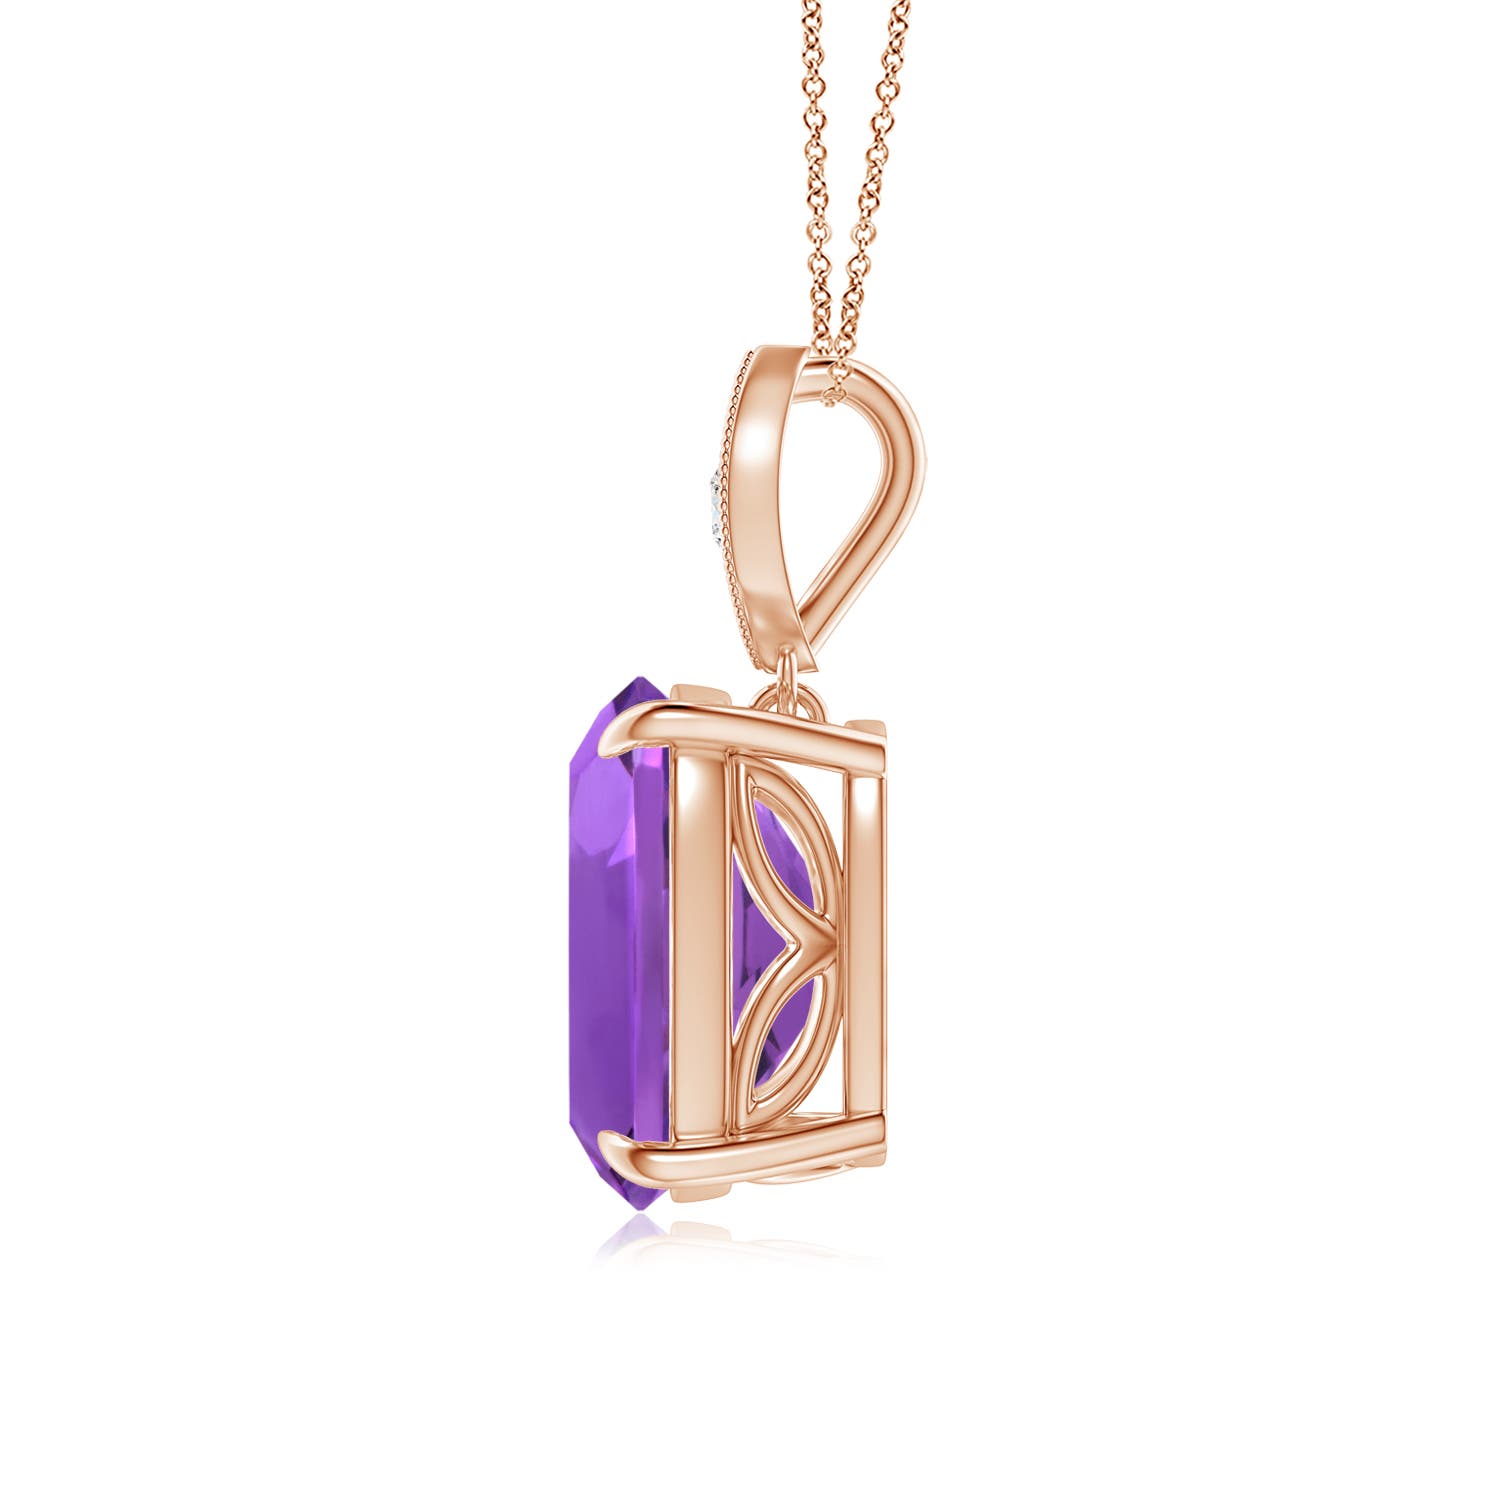 AAA - Amethyst / 2.75 CT / 14 KT Rose Gold